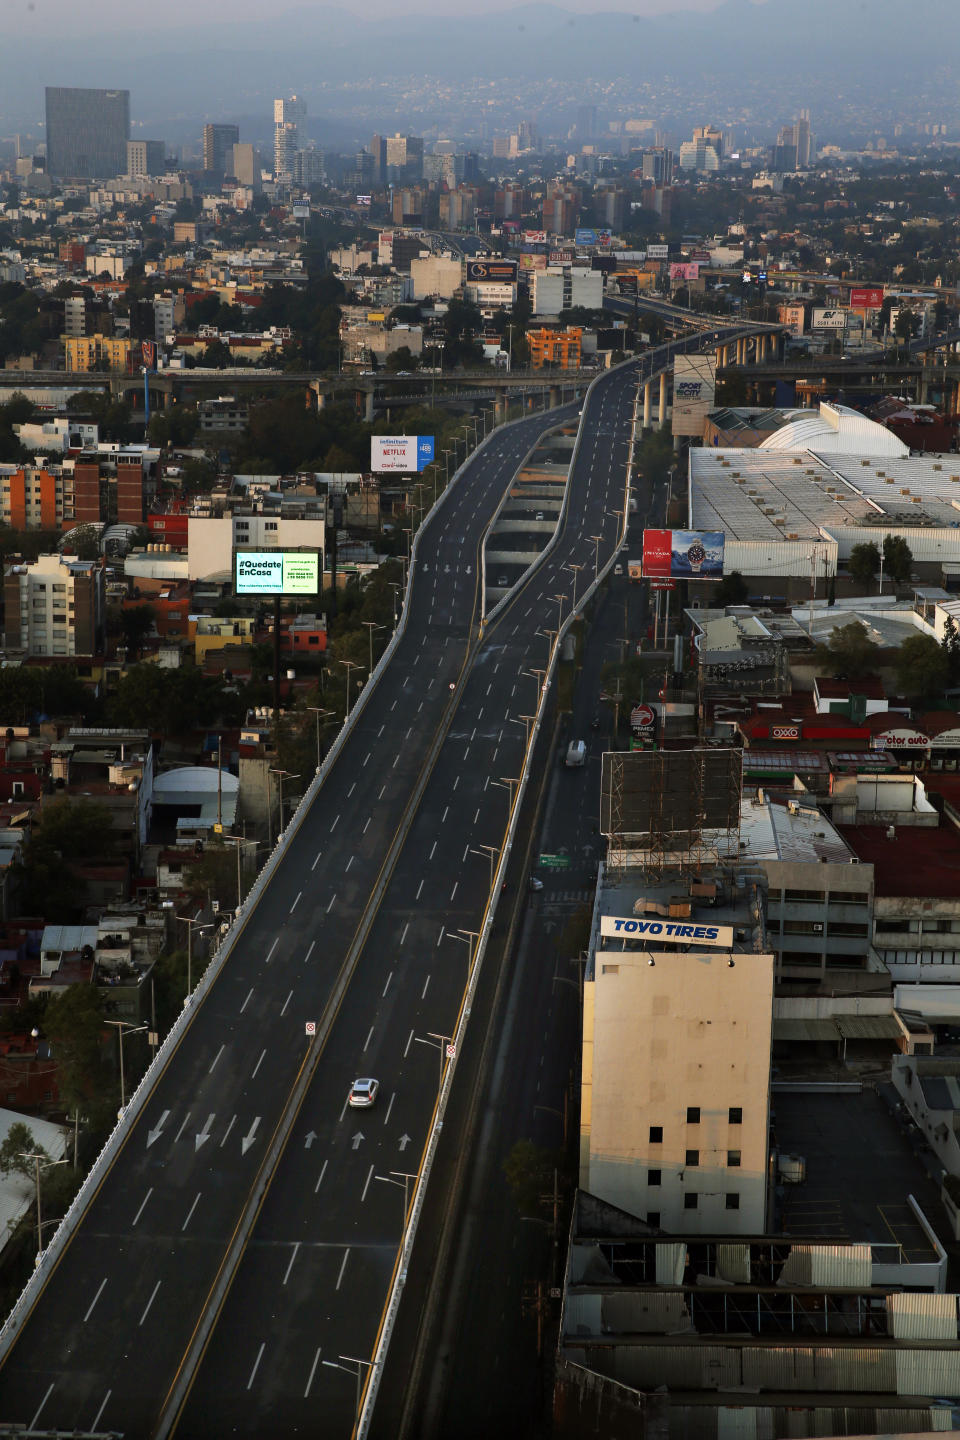 The Adlfo Lopez Mateo Boulevard, better known as "El Periferico," or The Periphery, is nearly devoid of traffic in Mexico City, early Friday, May 8, 2020. The previous day, Mexico saw its largest one-day increase yet in confirmed cases of COVID-19. (AP Photo/Marco Ugarte)